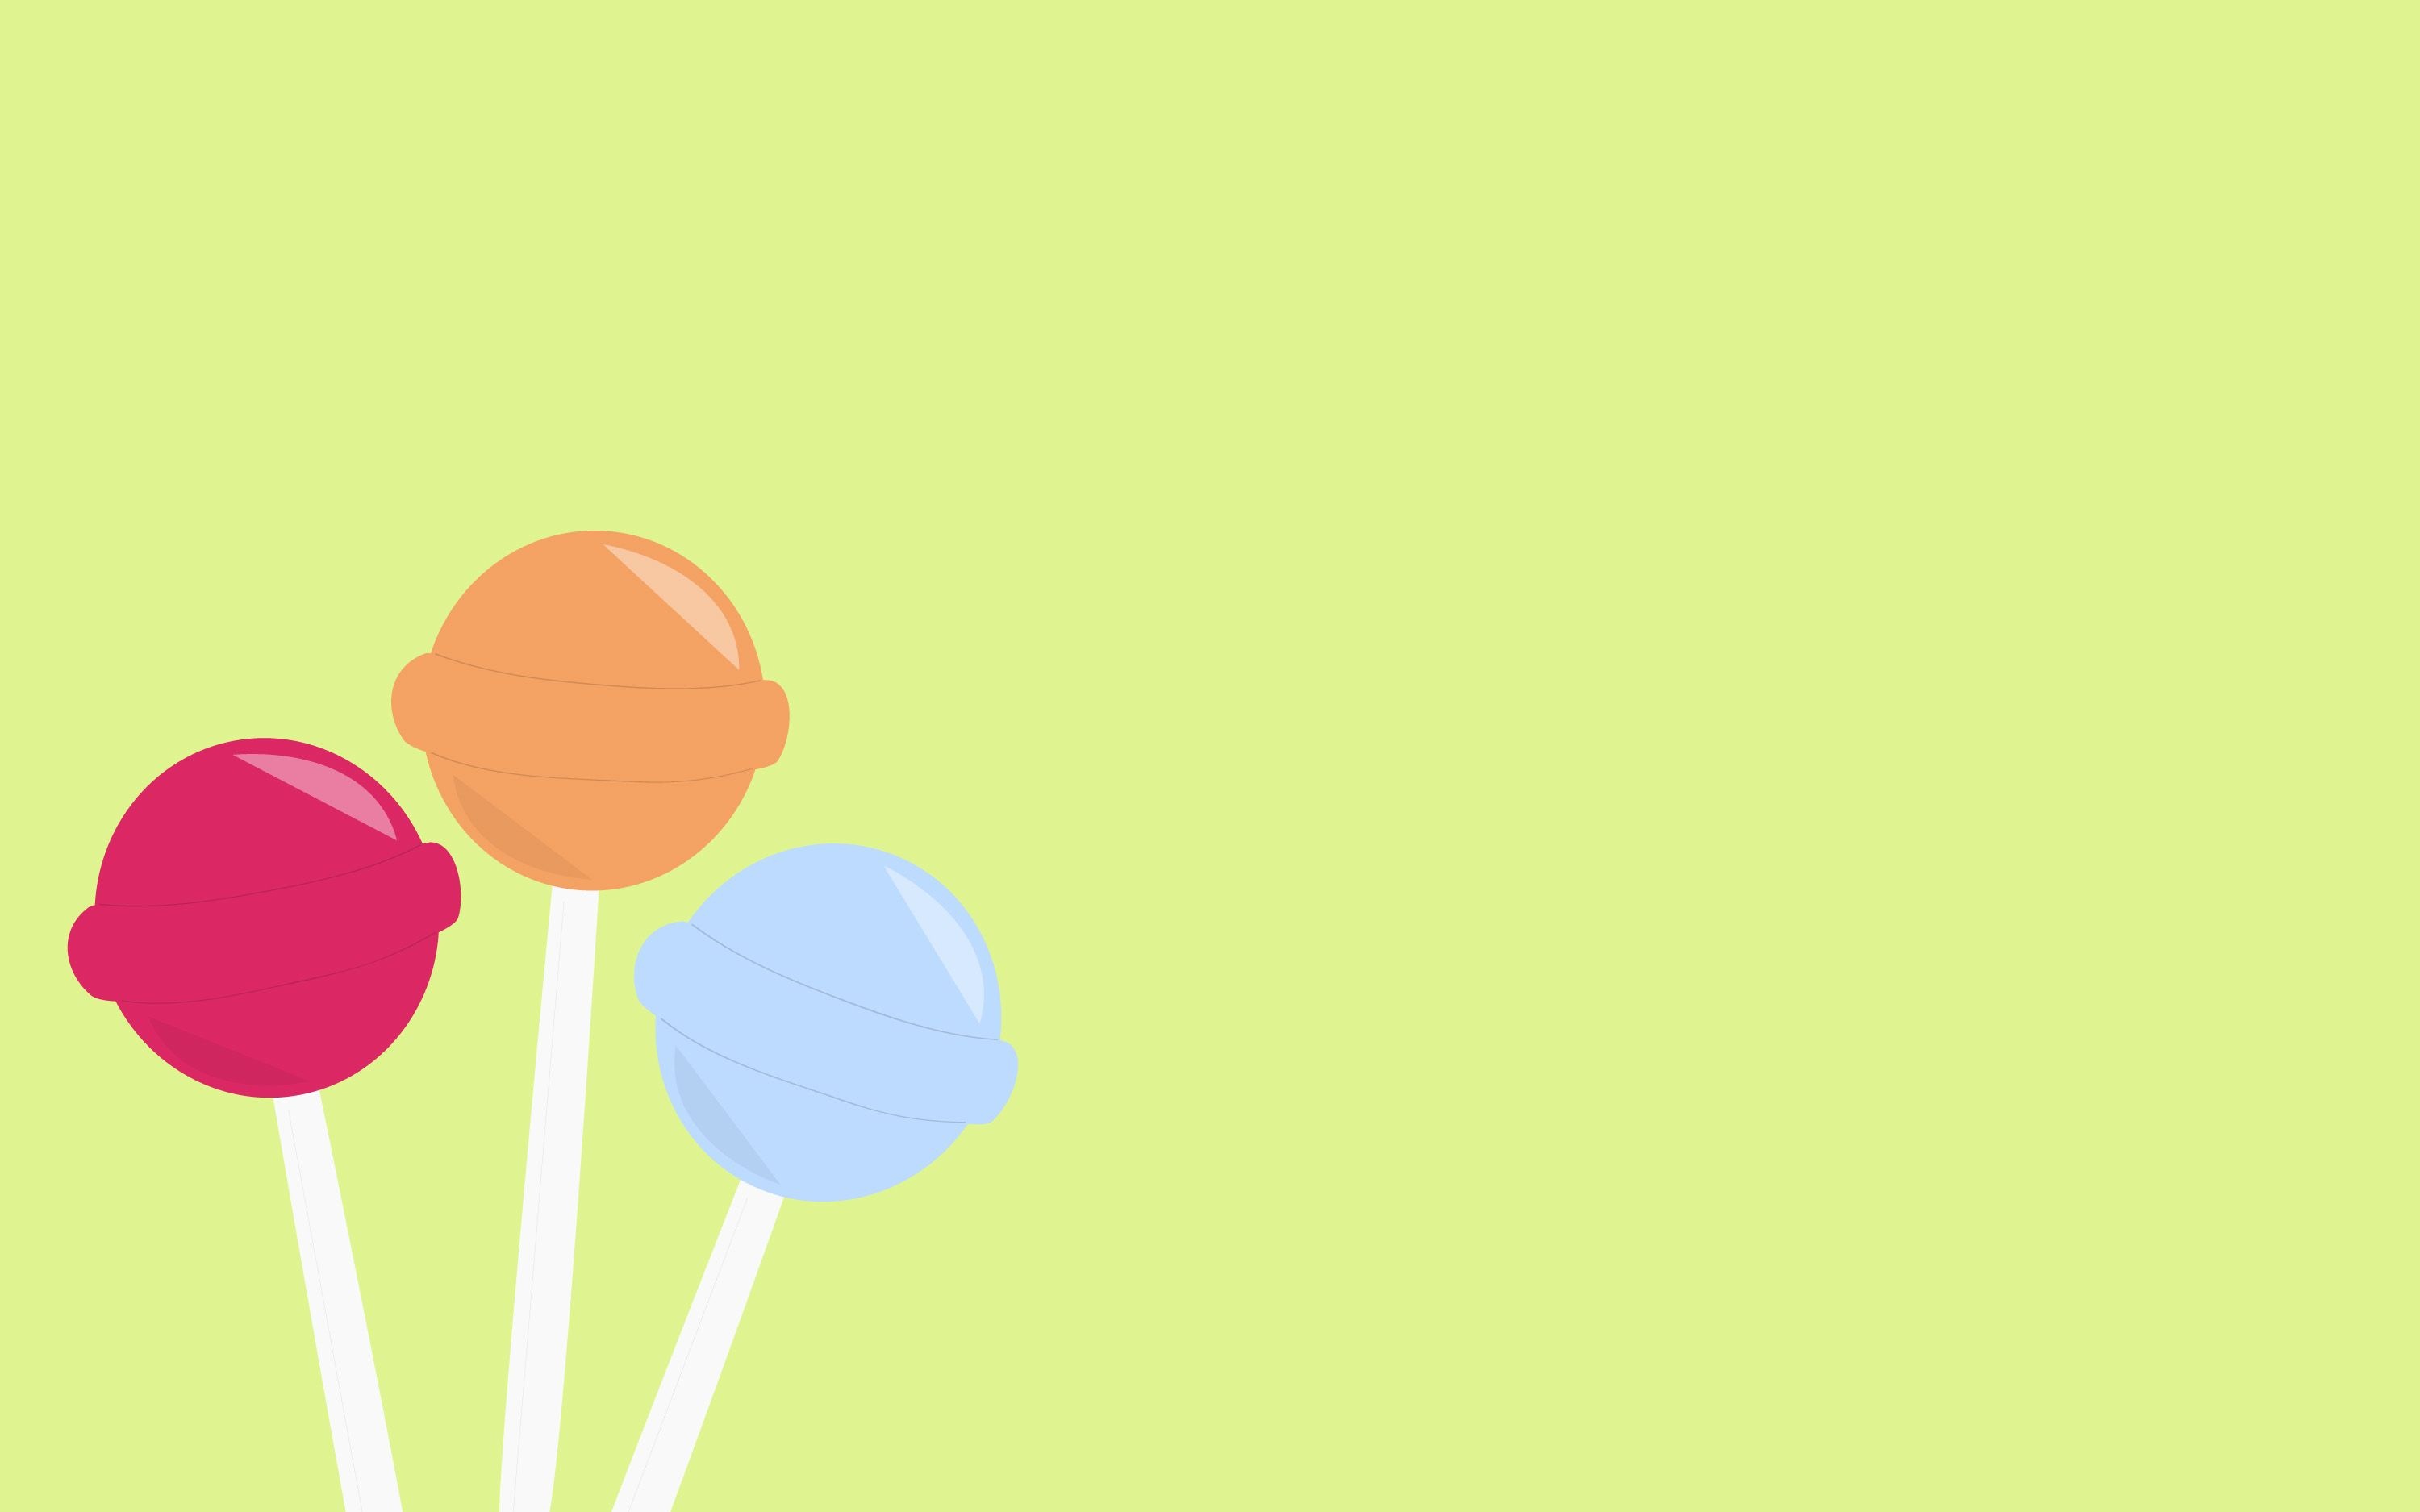 Adorable lollipop wallpapers, Cute and delightful, Fun and playful, Sweet candy inspiration, 3000x1880 HD Desktop